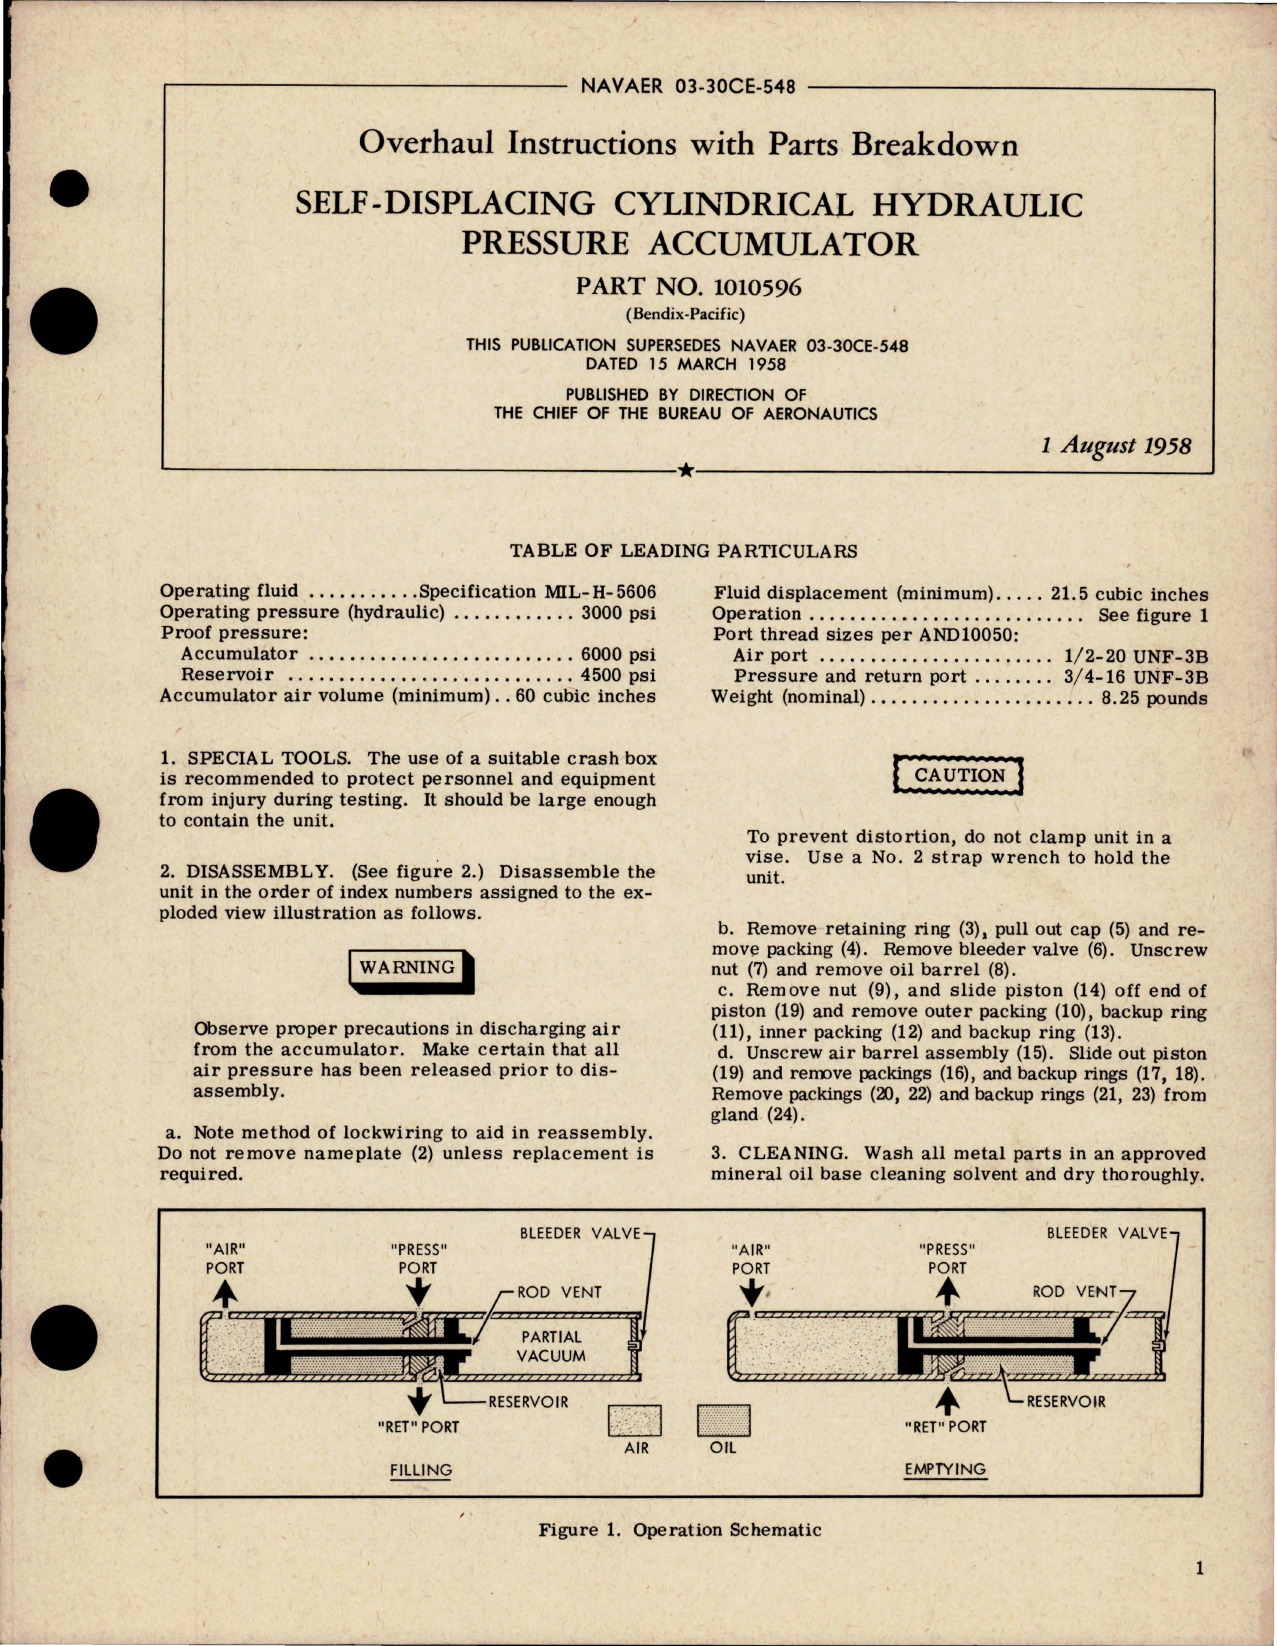 Sample page 1 from AirCorps Library document: Overhaul Instructions with Parts for Self Displacing Cylindrical Hydraulic Pressure Accumulator - Part 1010596